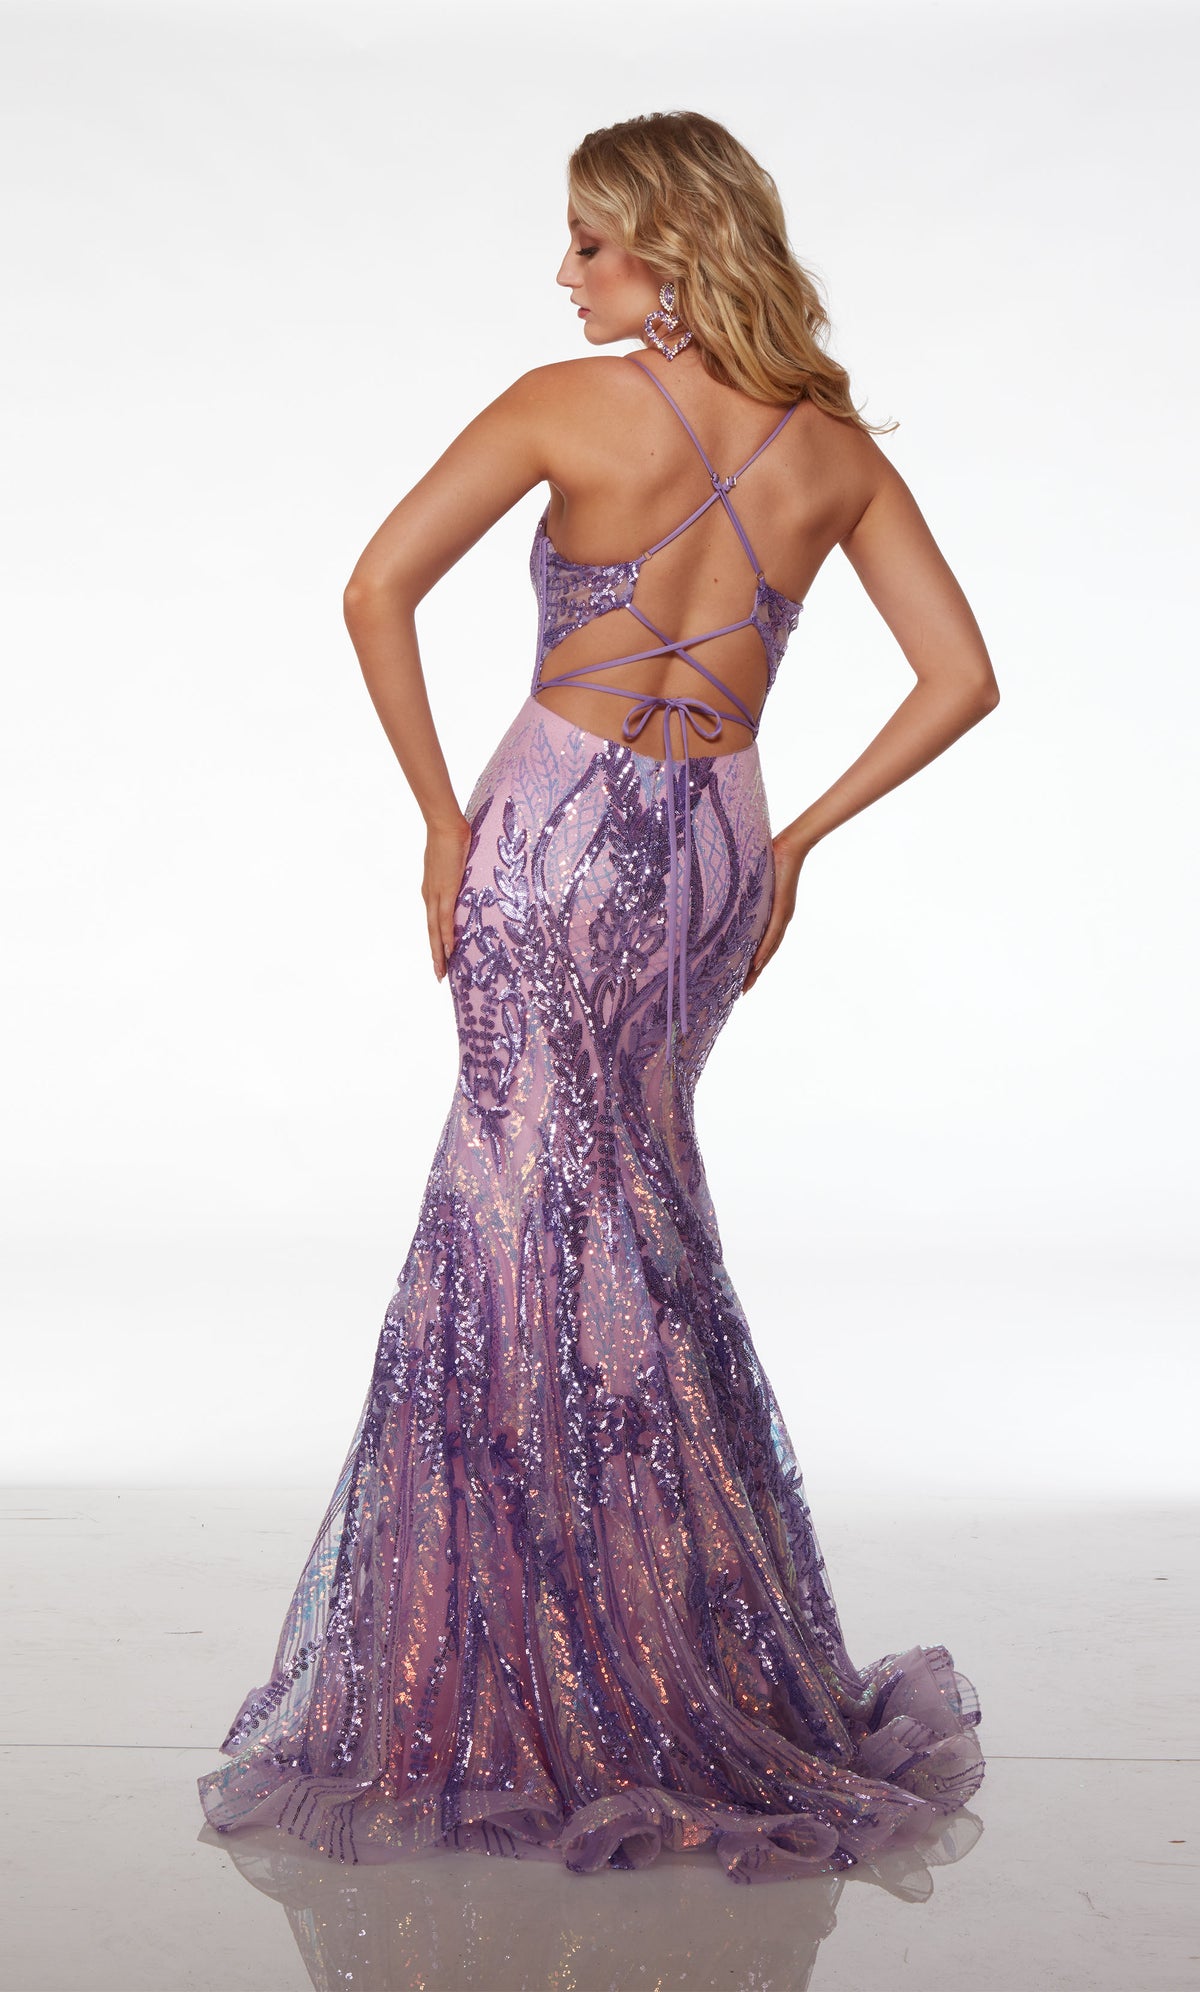 Elegant lilac-pink iridescent sequin formal dress: plunging neckline, corset top, fit-and-flare silhouette, crisscross lace-up back, and trailing train.